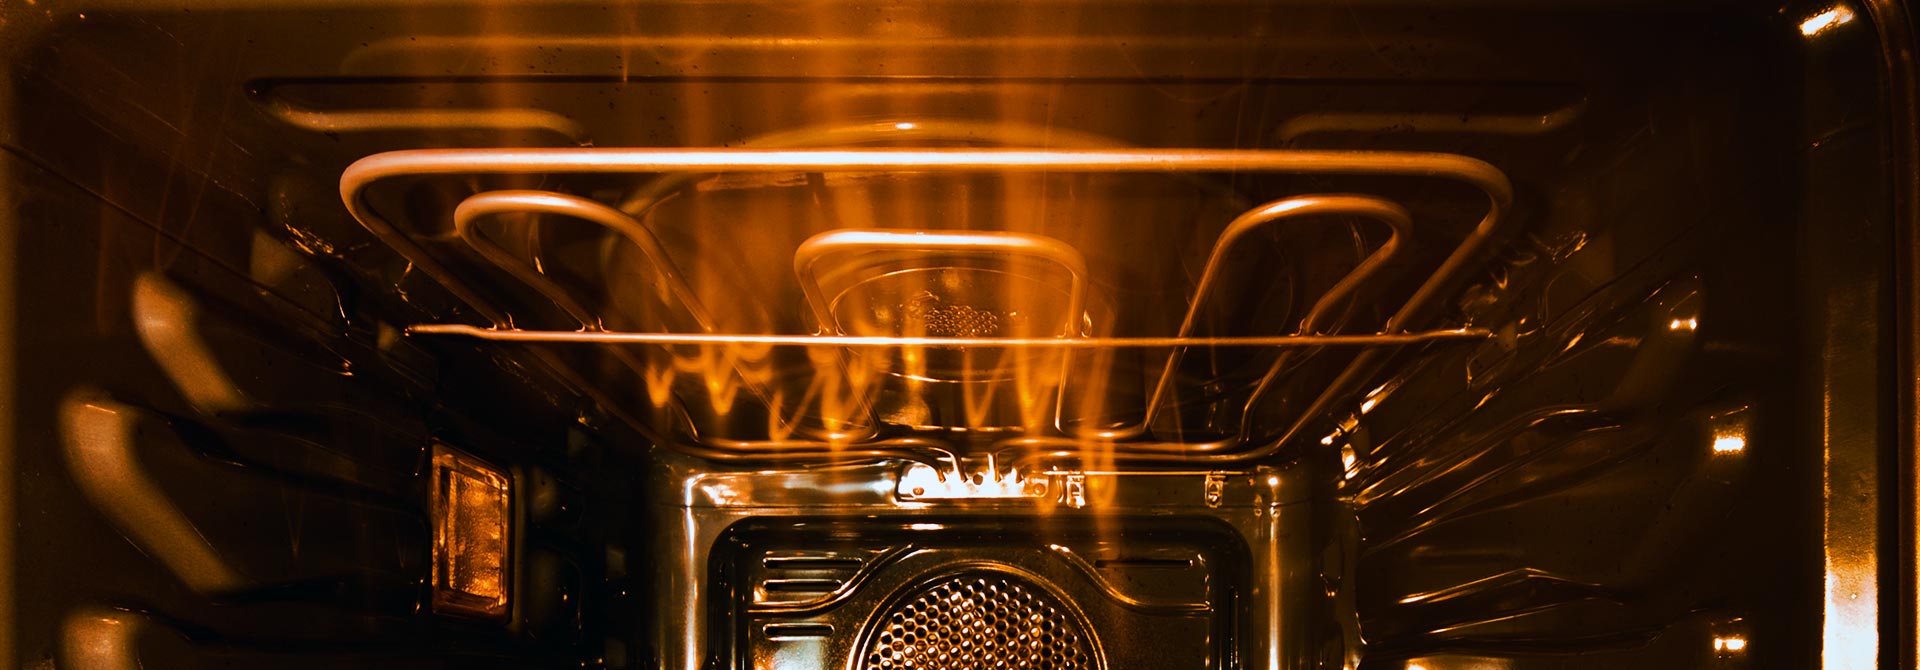 pyrolytic cleaning cycle in an oven